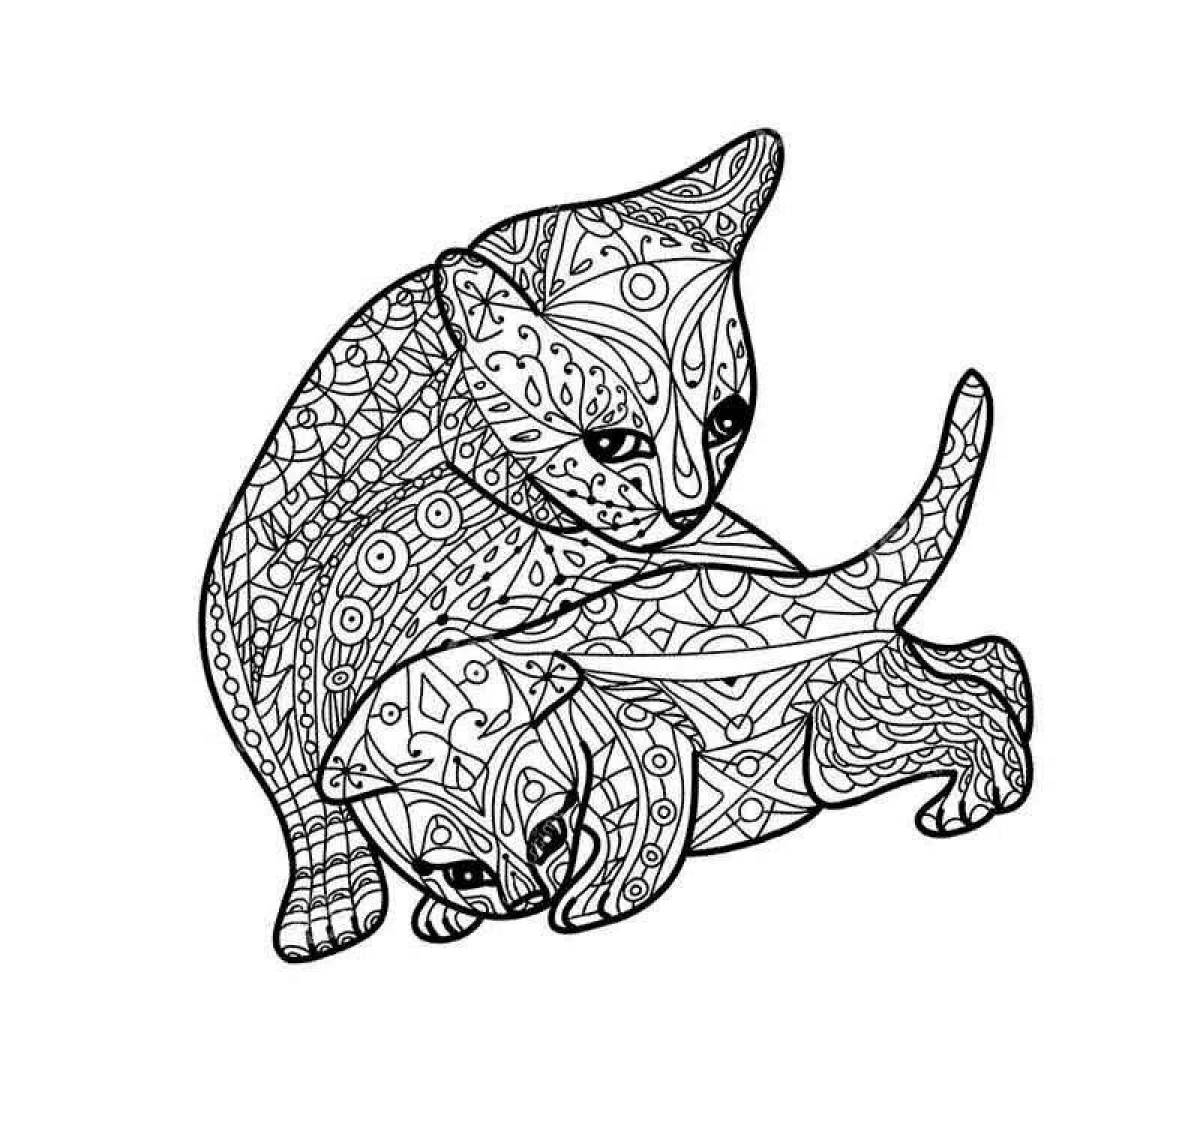 Complex cats mysterious coloring book